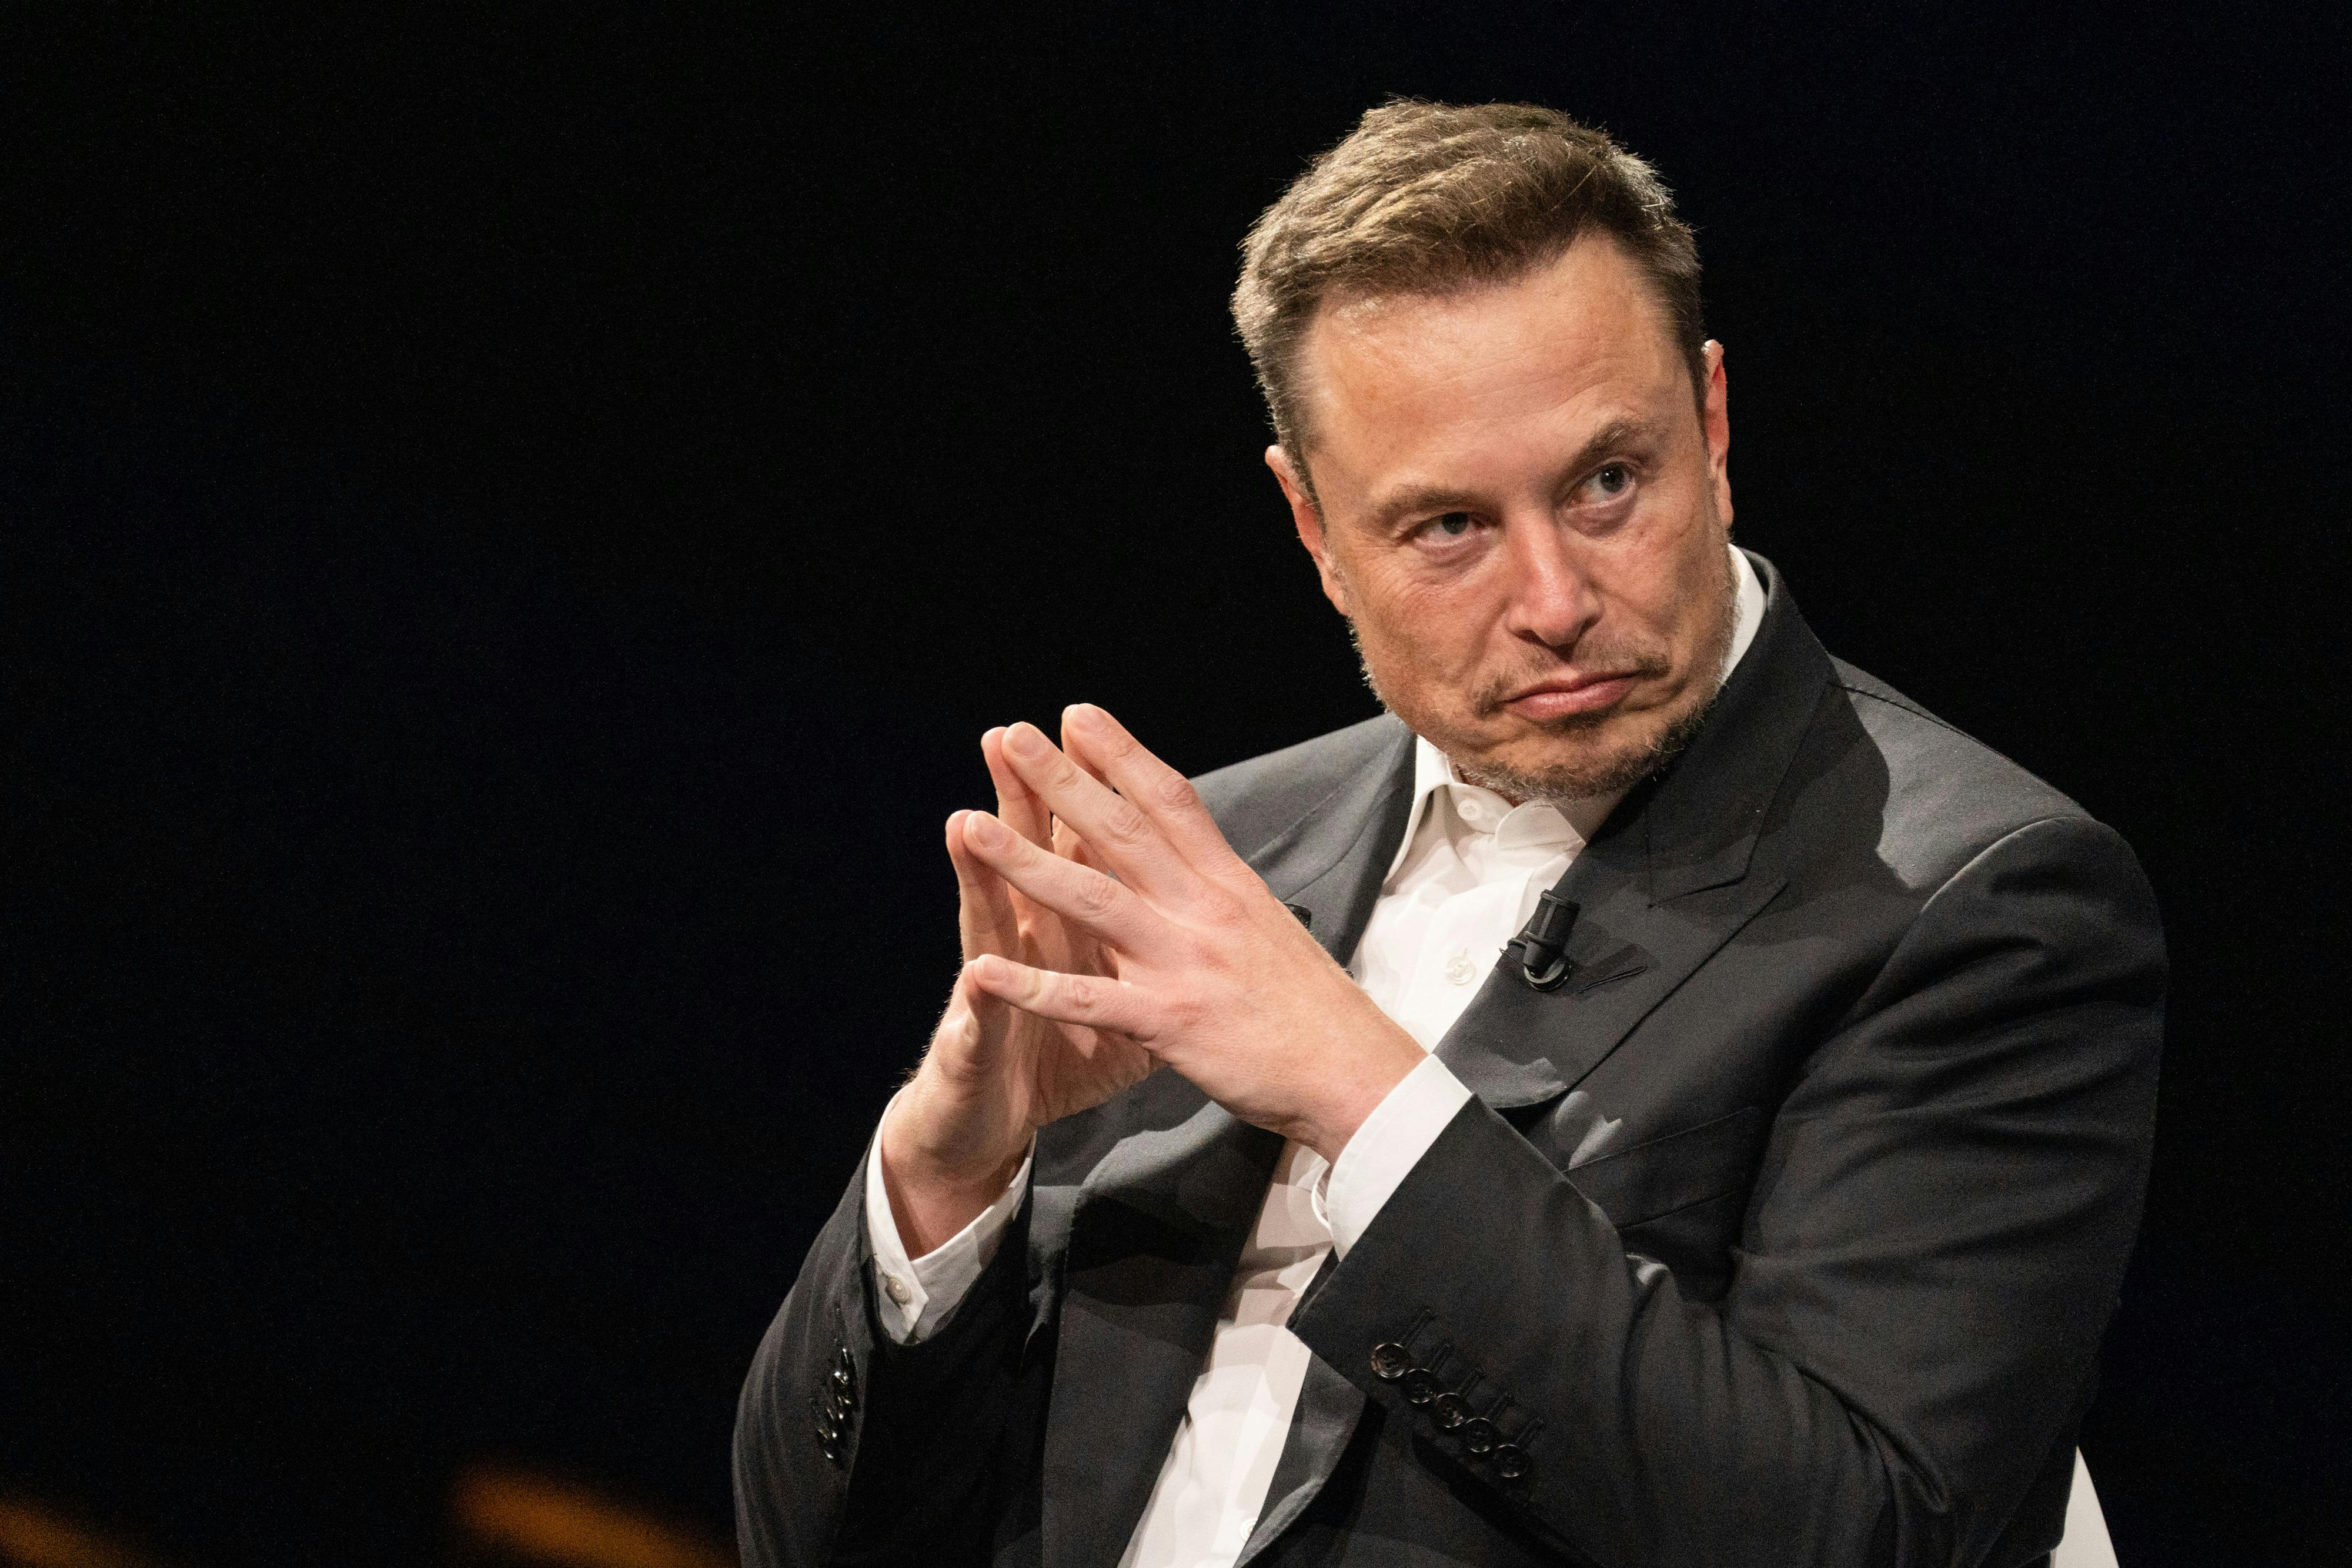 The Elon Musk Show review: Searching for the man who is Elon Musk